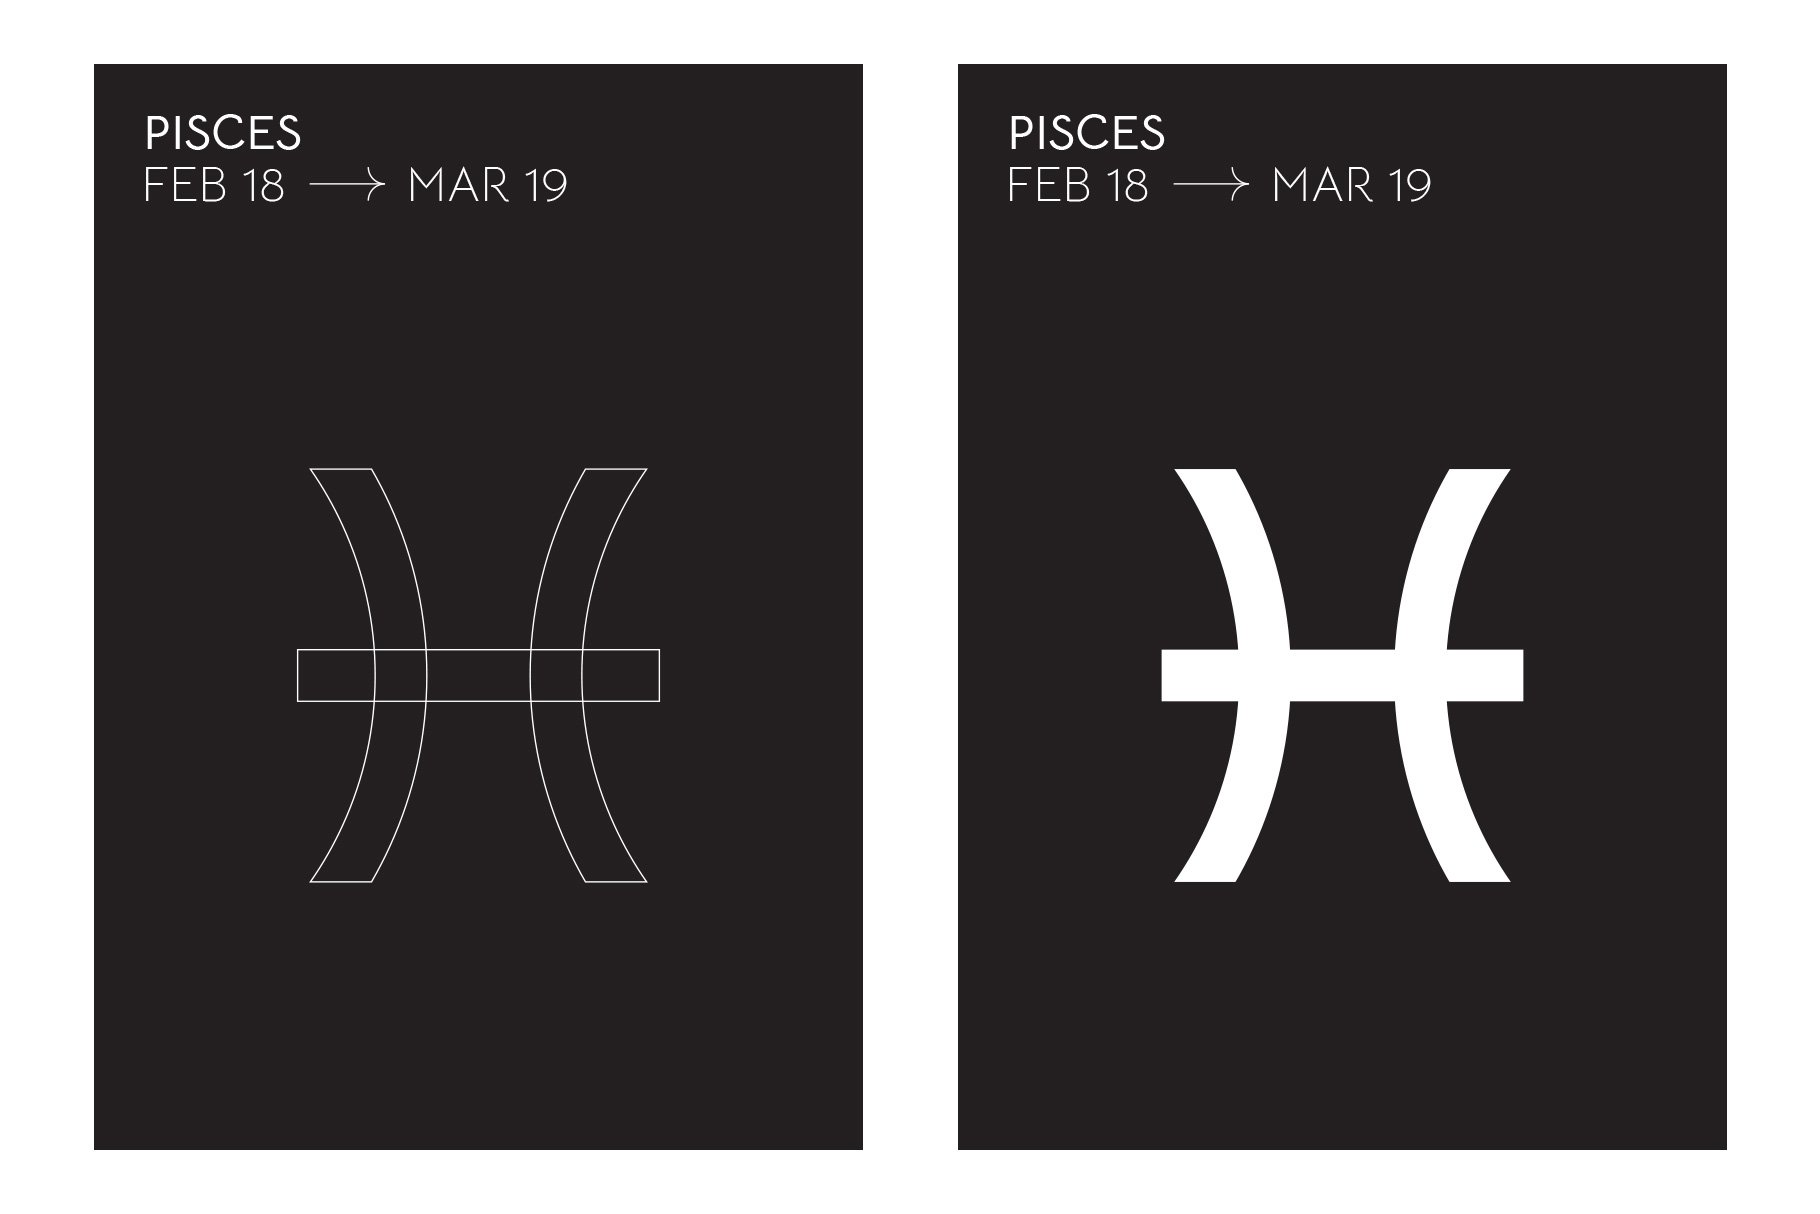 Outline and bold white Pisces graphic.